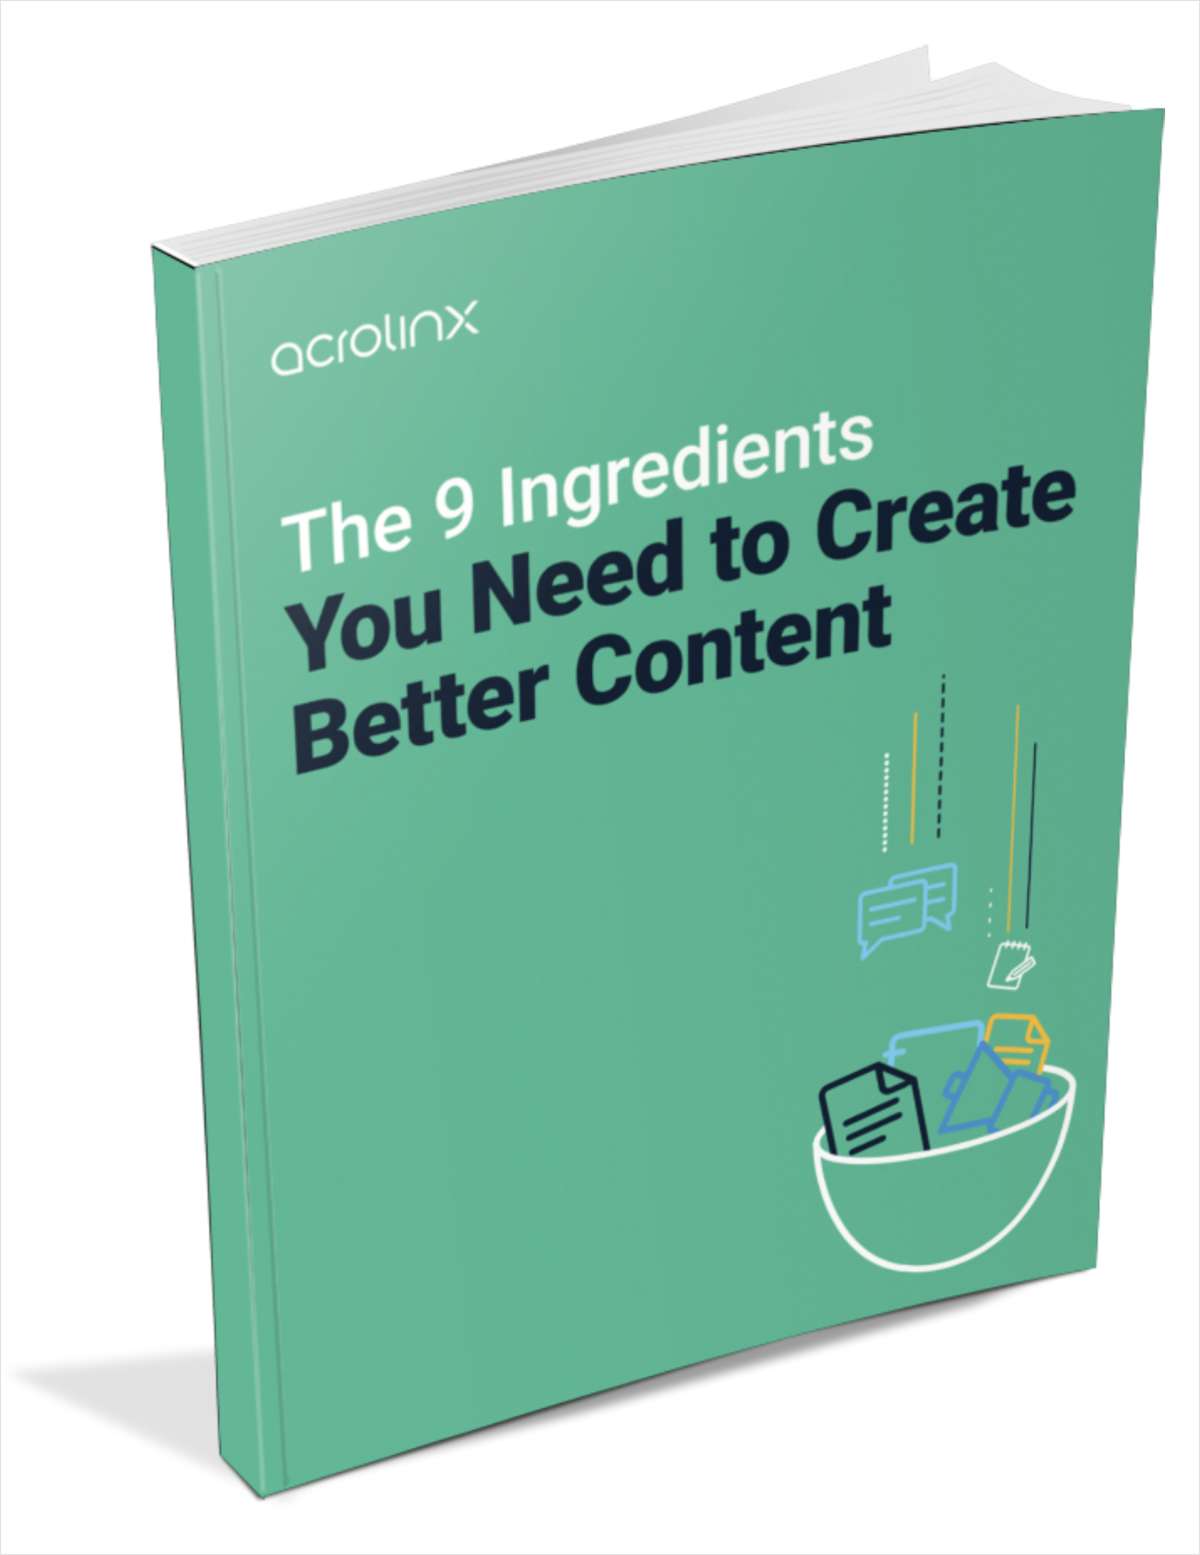 The 9 Ingredients You Need to Create Better Content